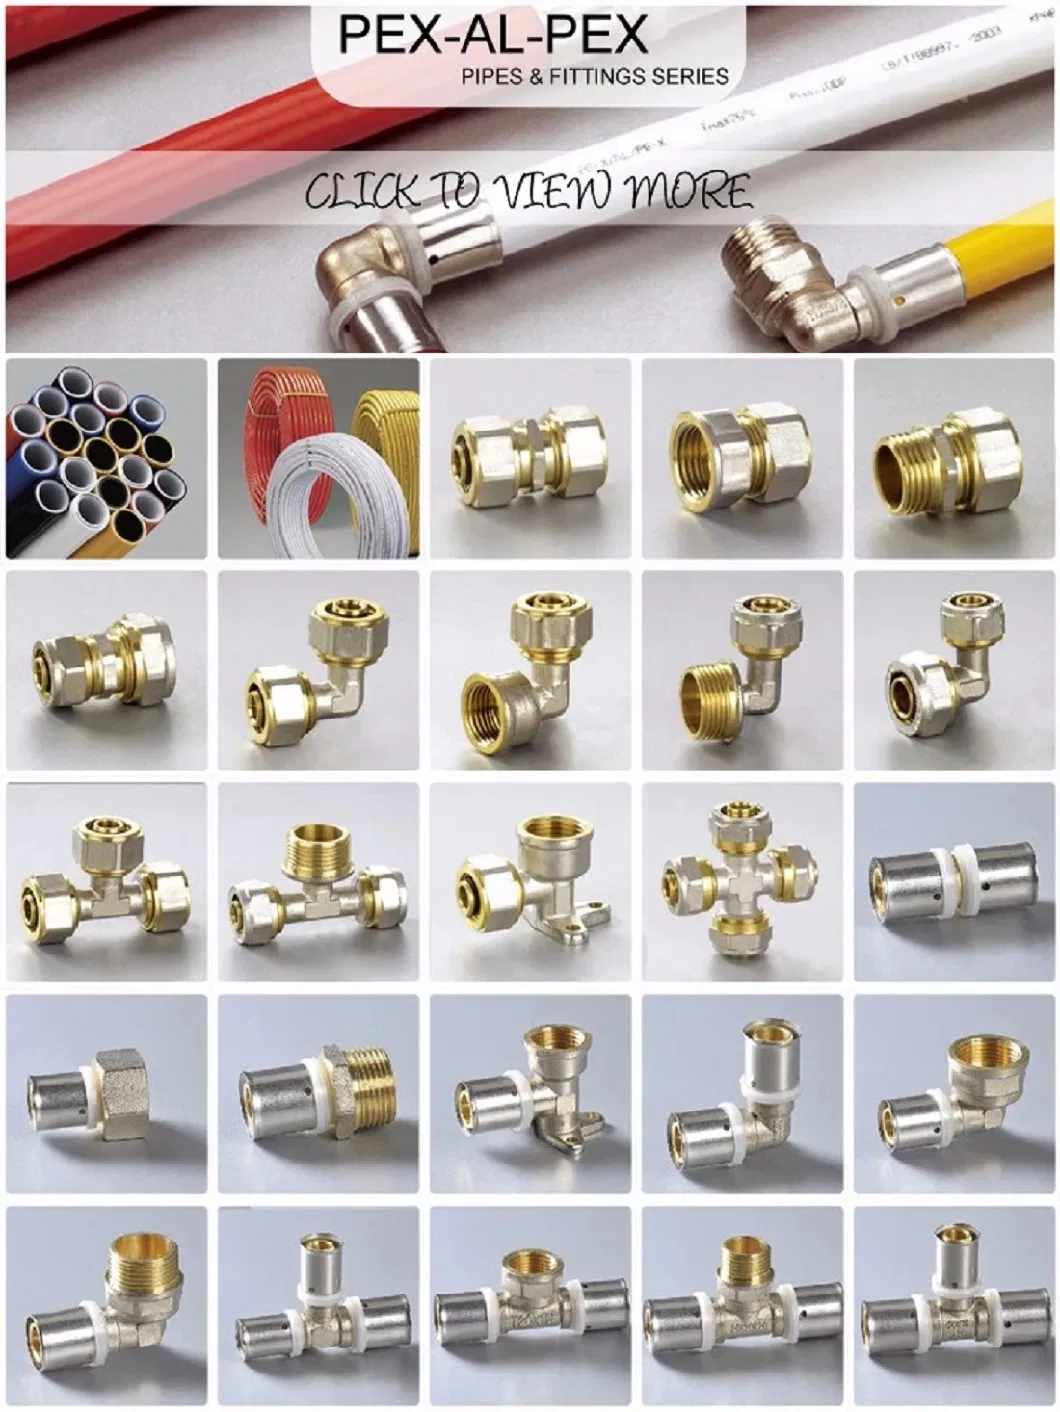 Plumbing elbow Female Thread Connector Compression Brass Fittings for Pex-Al-Pex Multilayer/Composite Pipes